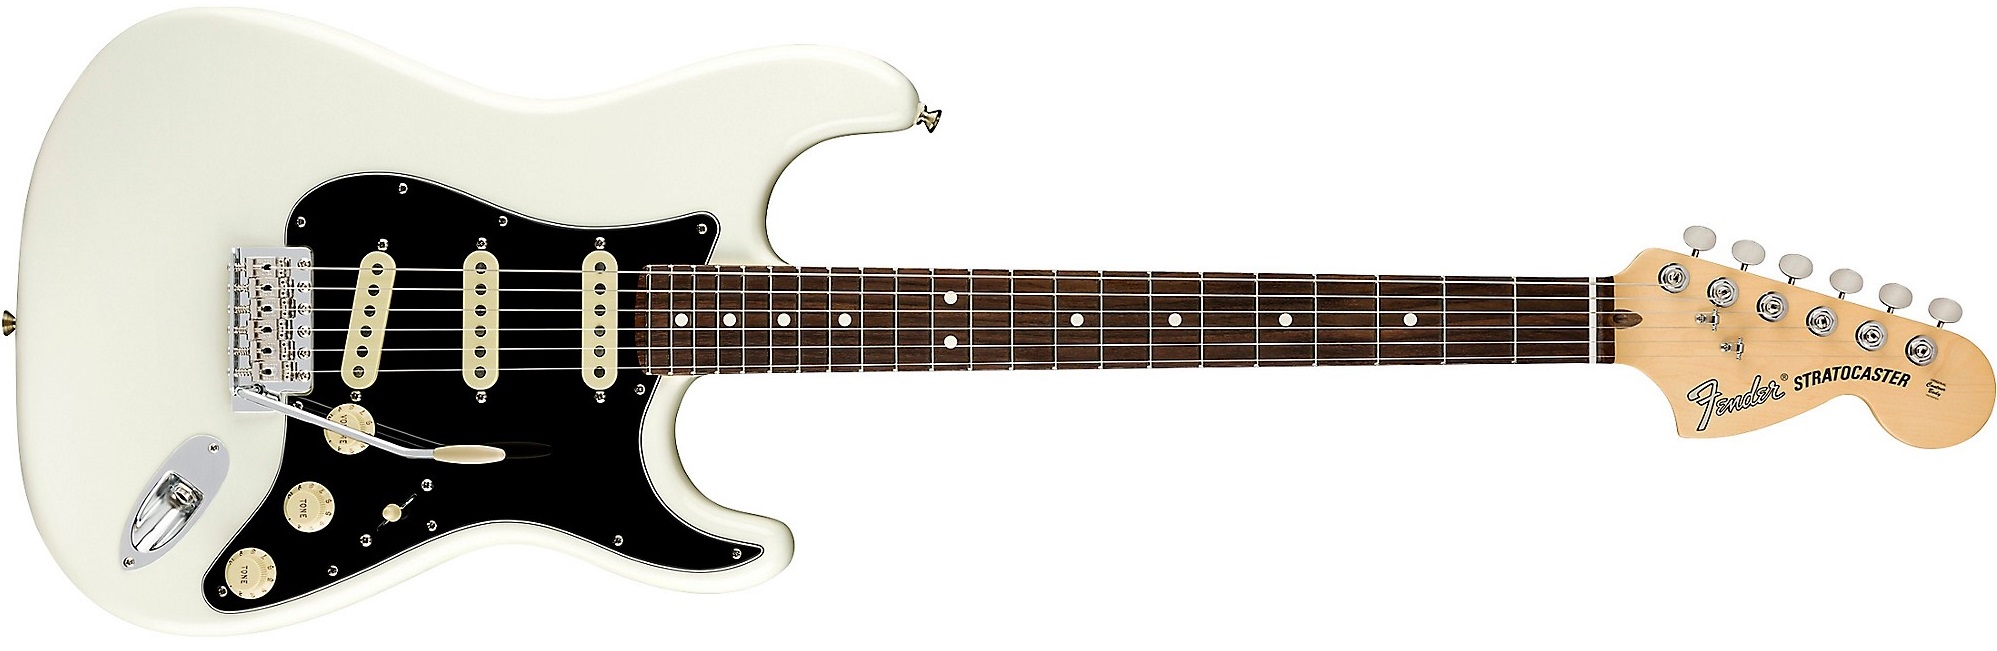 Fender American Performer Stratocaster Electric Guitar on a white background